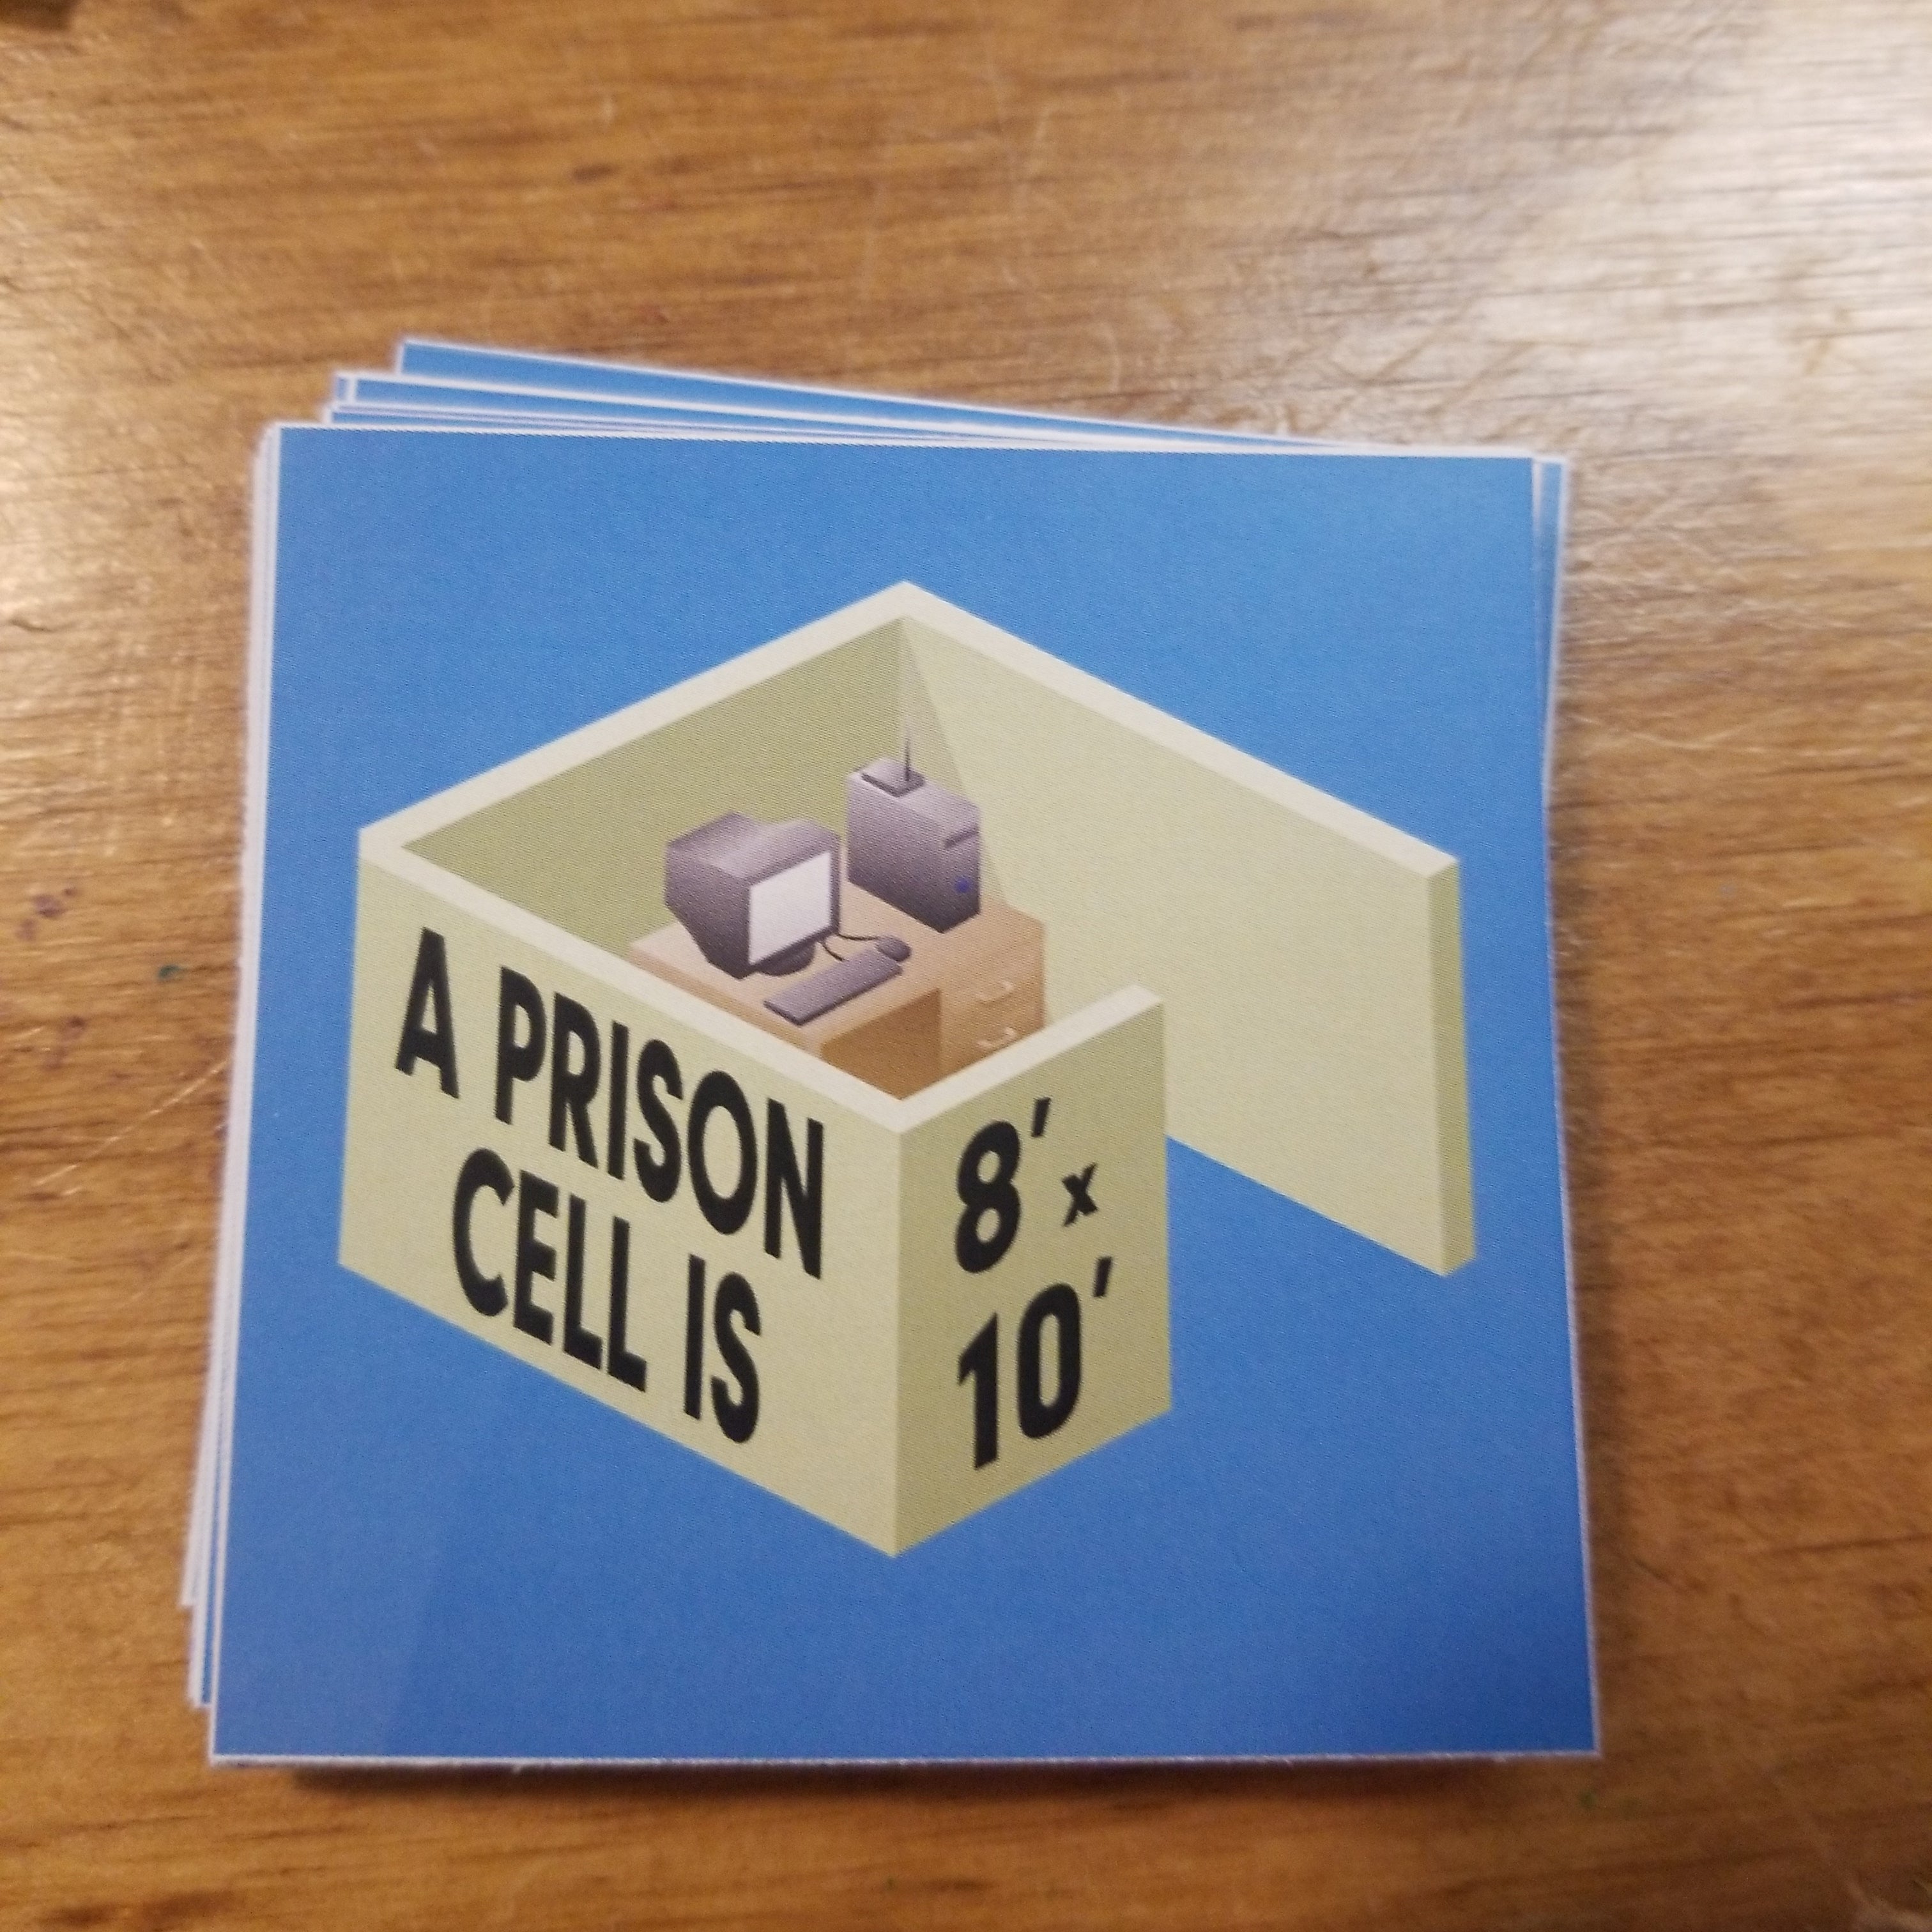 A Prison Cell Is 8x10 STICKER